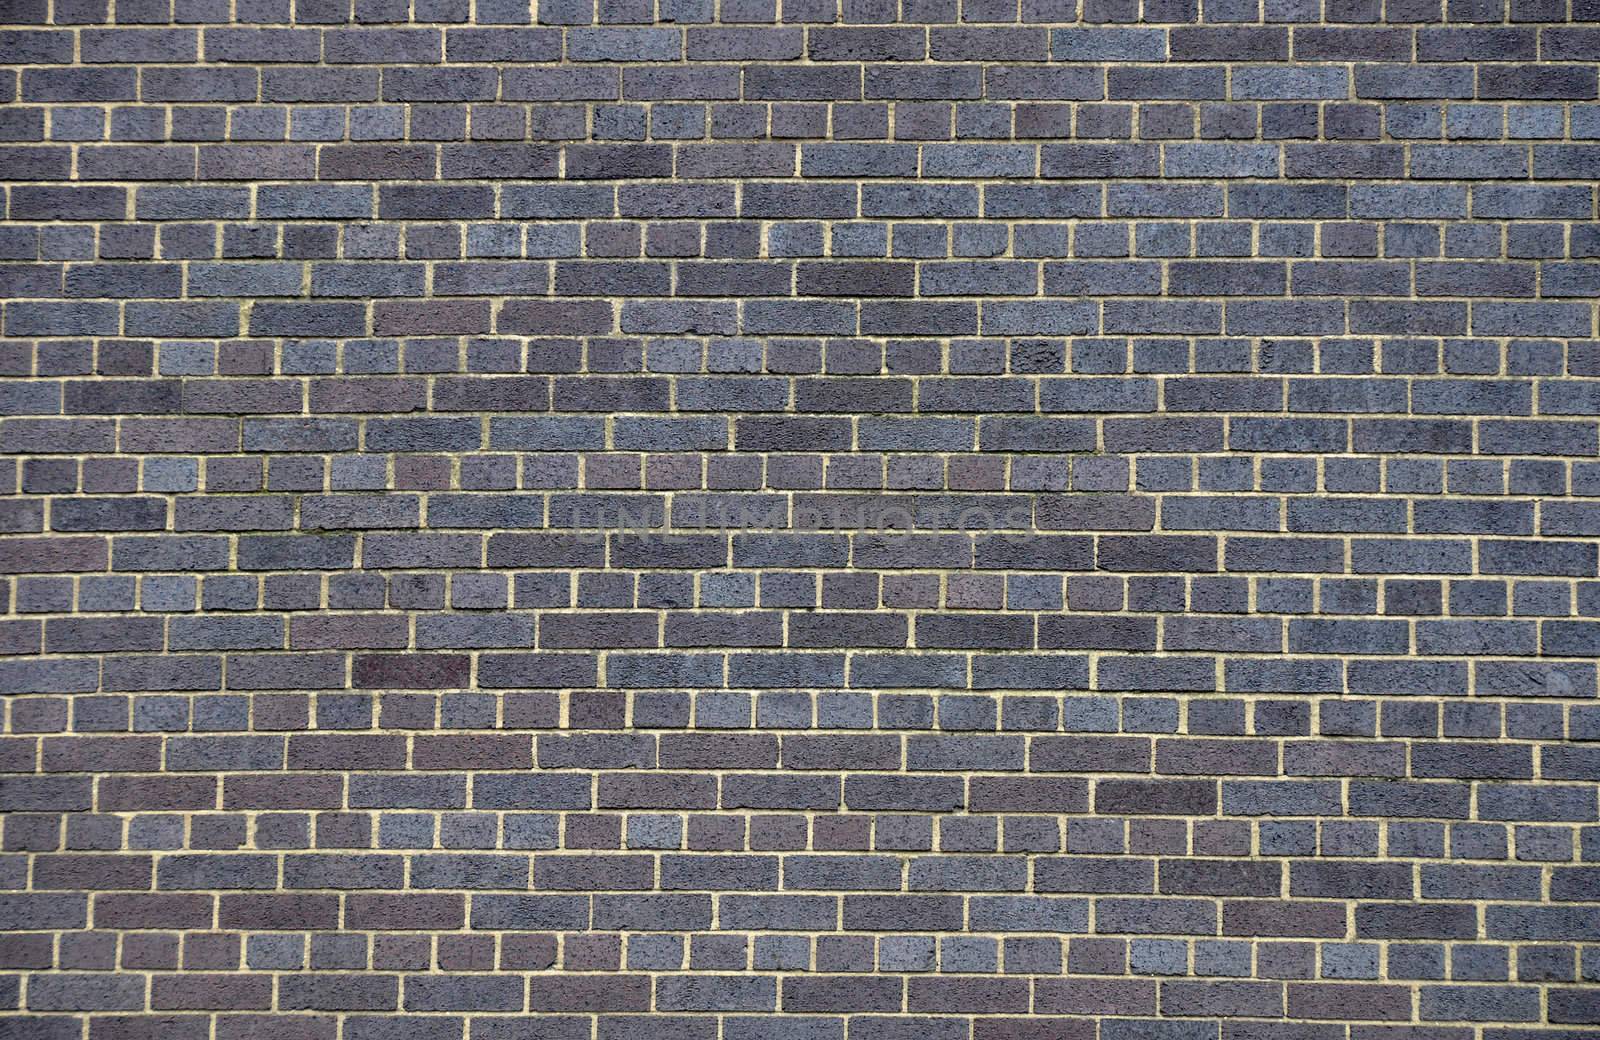 Dark brick wall, perfect as a background